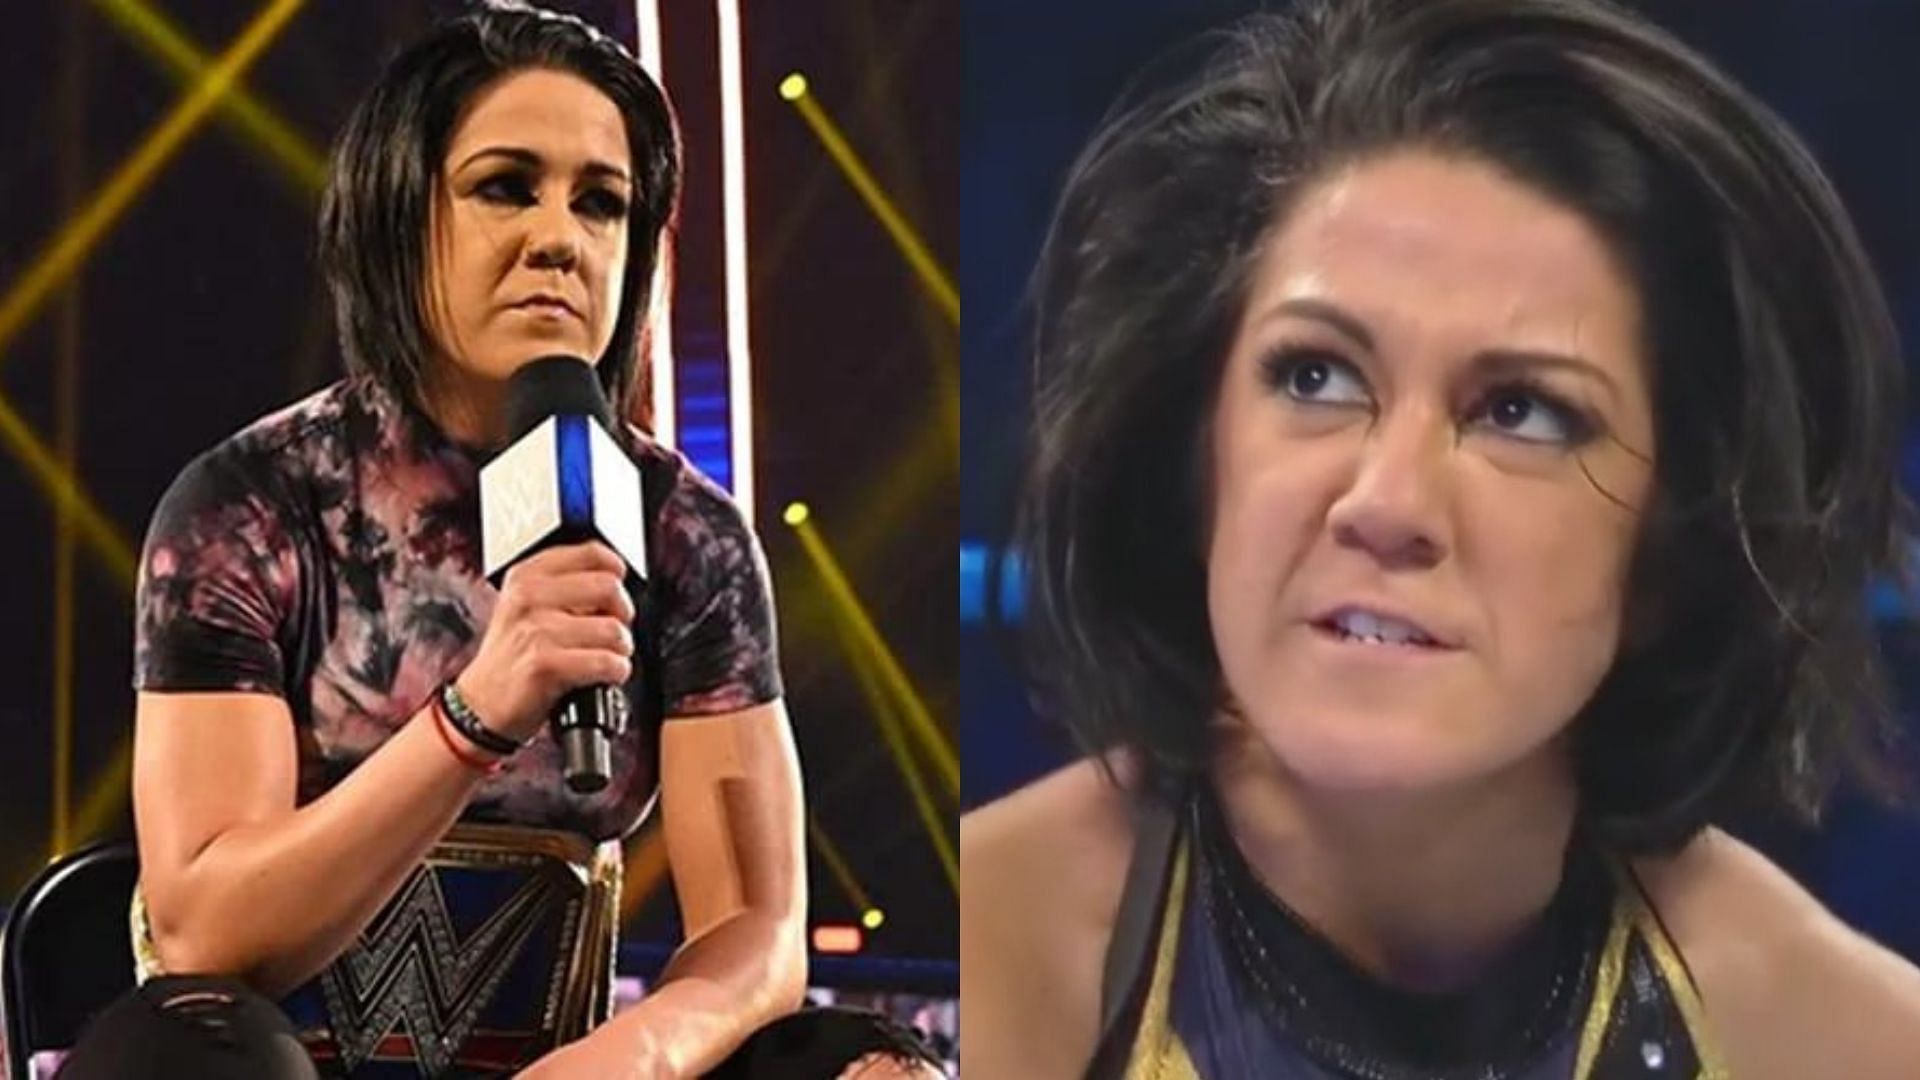 Bayley and Damage CTRL could go their separate paths